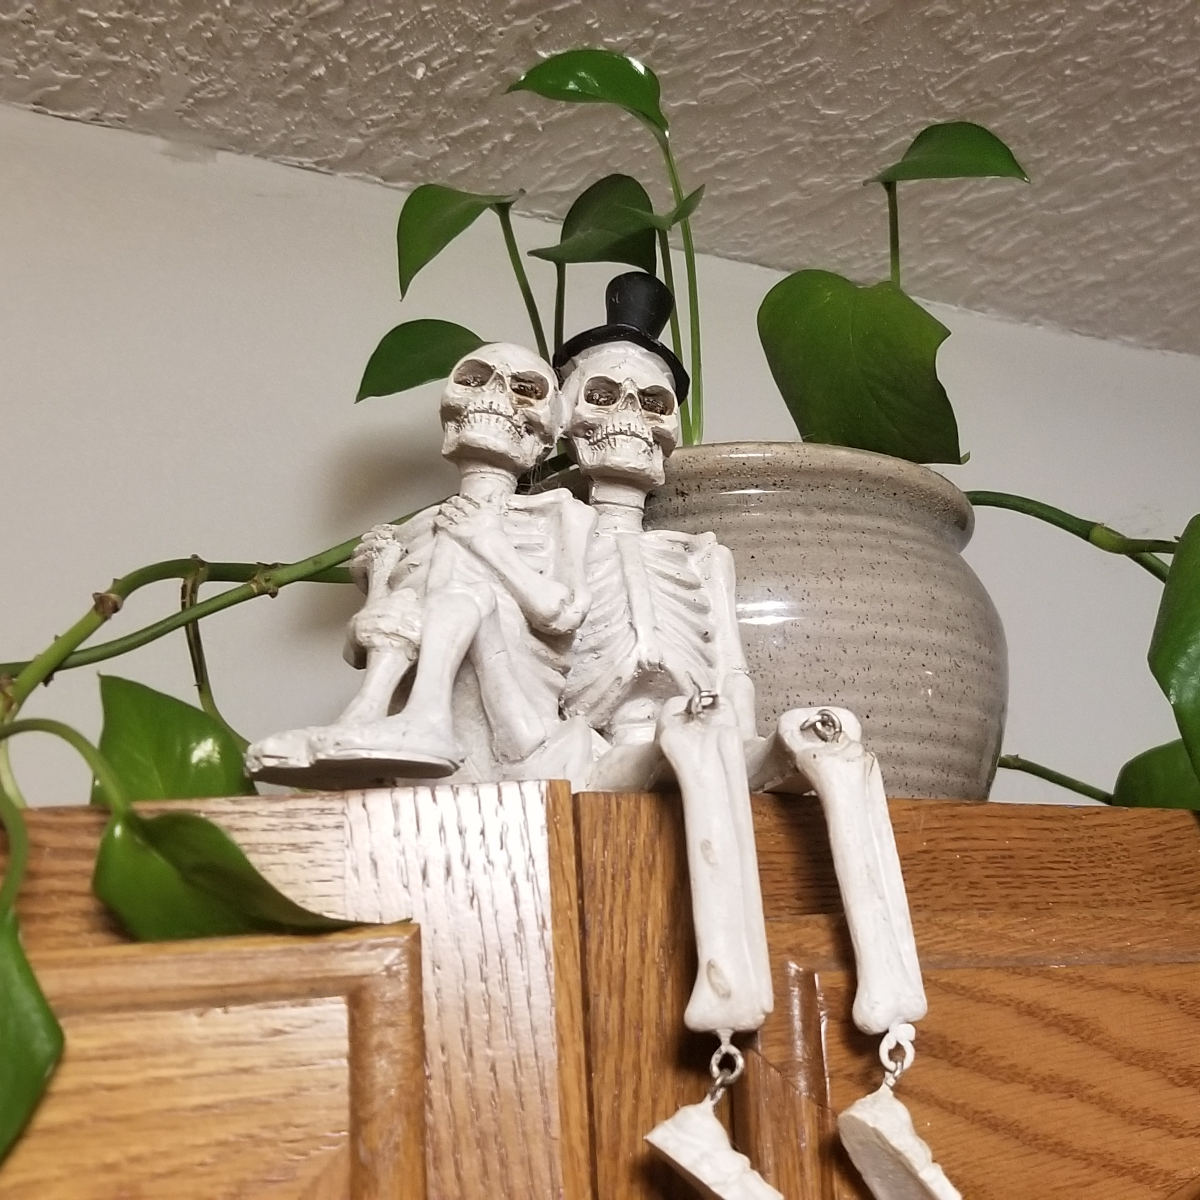 A skeleton couple sitting near a potted pathos plant.